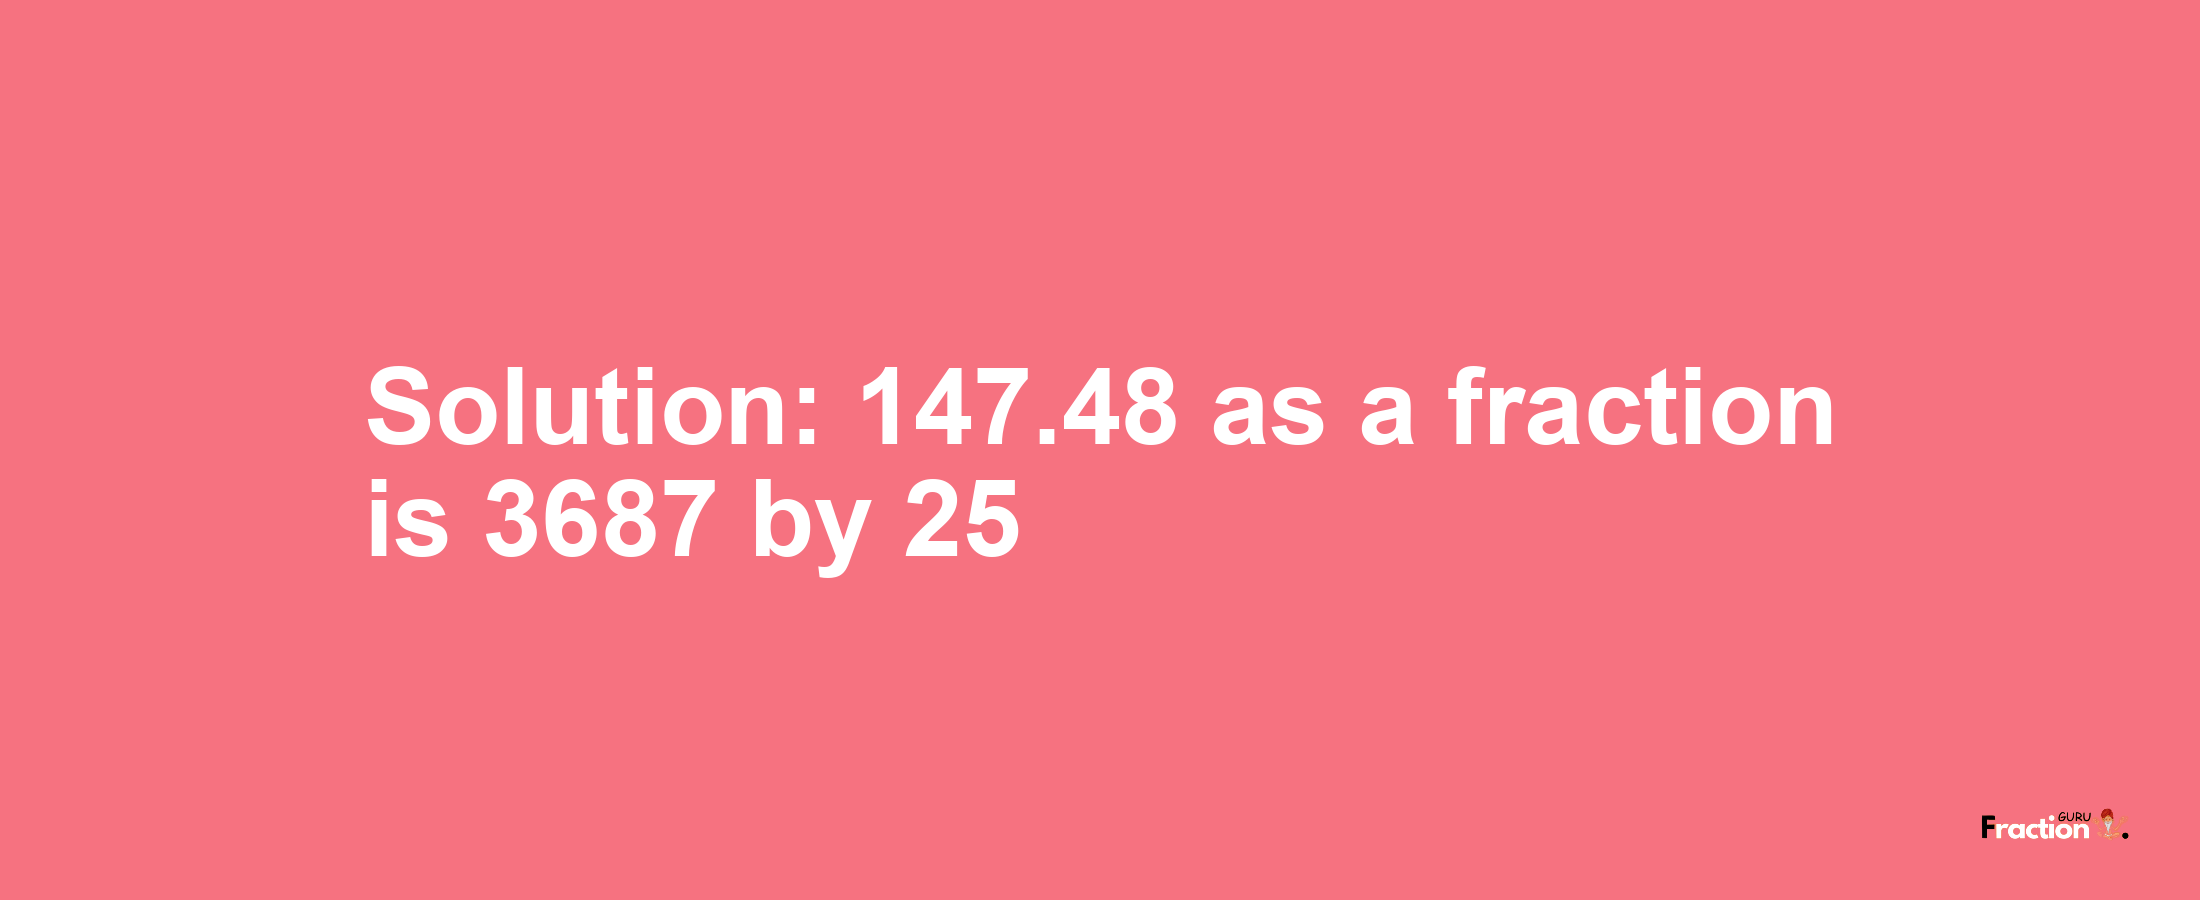 Solution:147.48 as a fraction is 3687/25